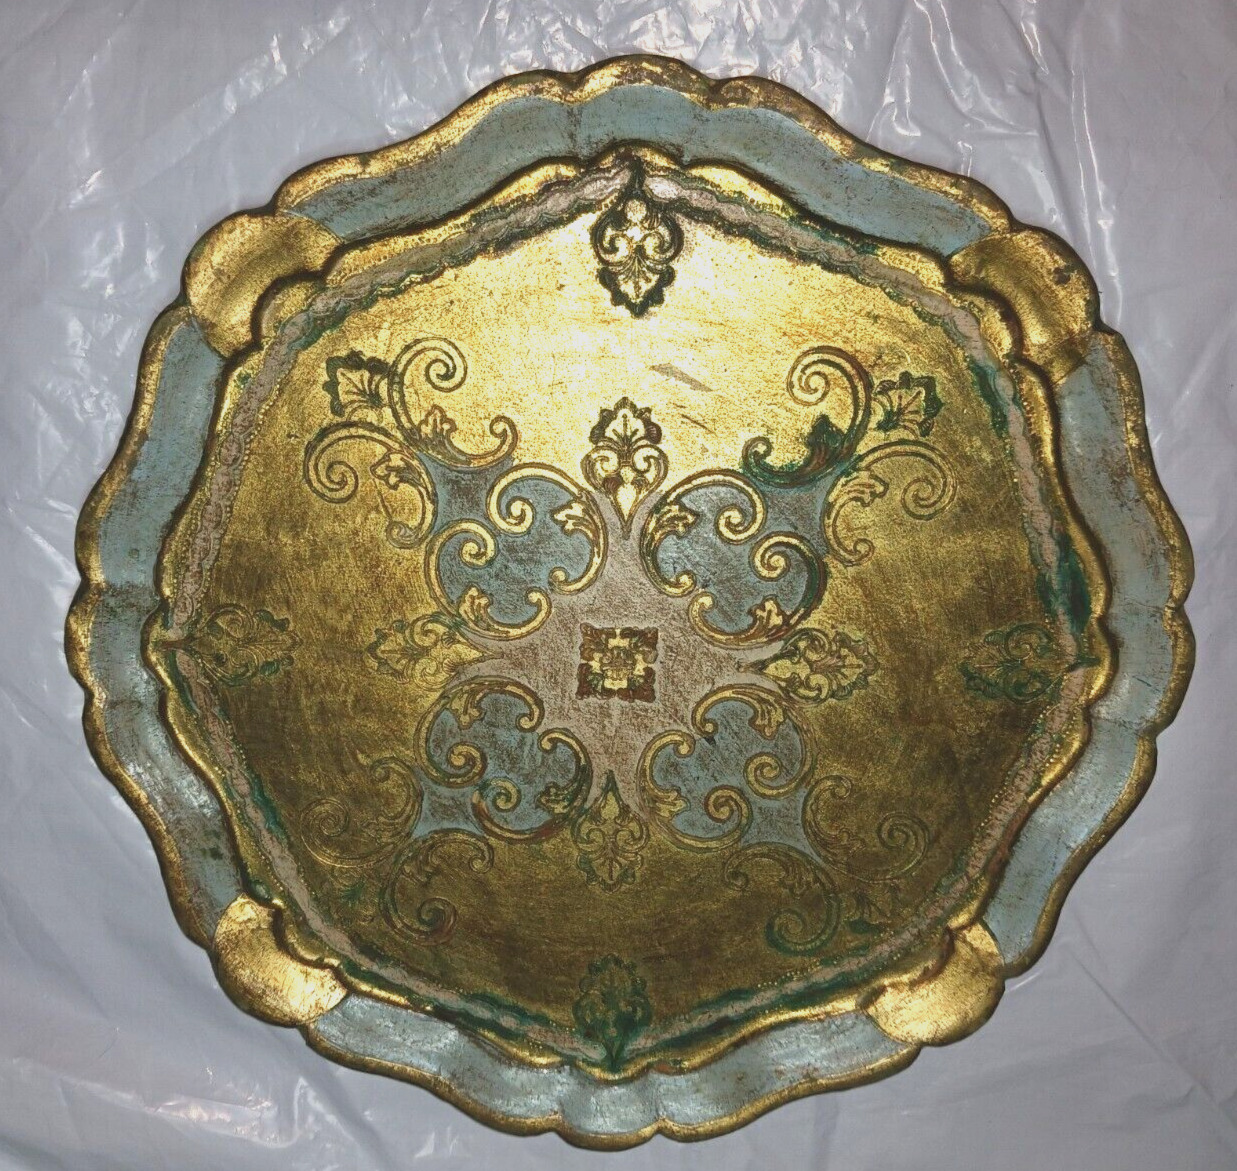 Vntg Florentia Italy Wood Hand Carved Tray Round Scalloped Gold Teal w/ Pantina